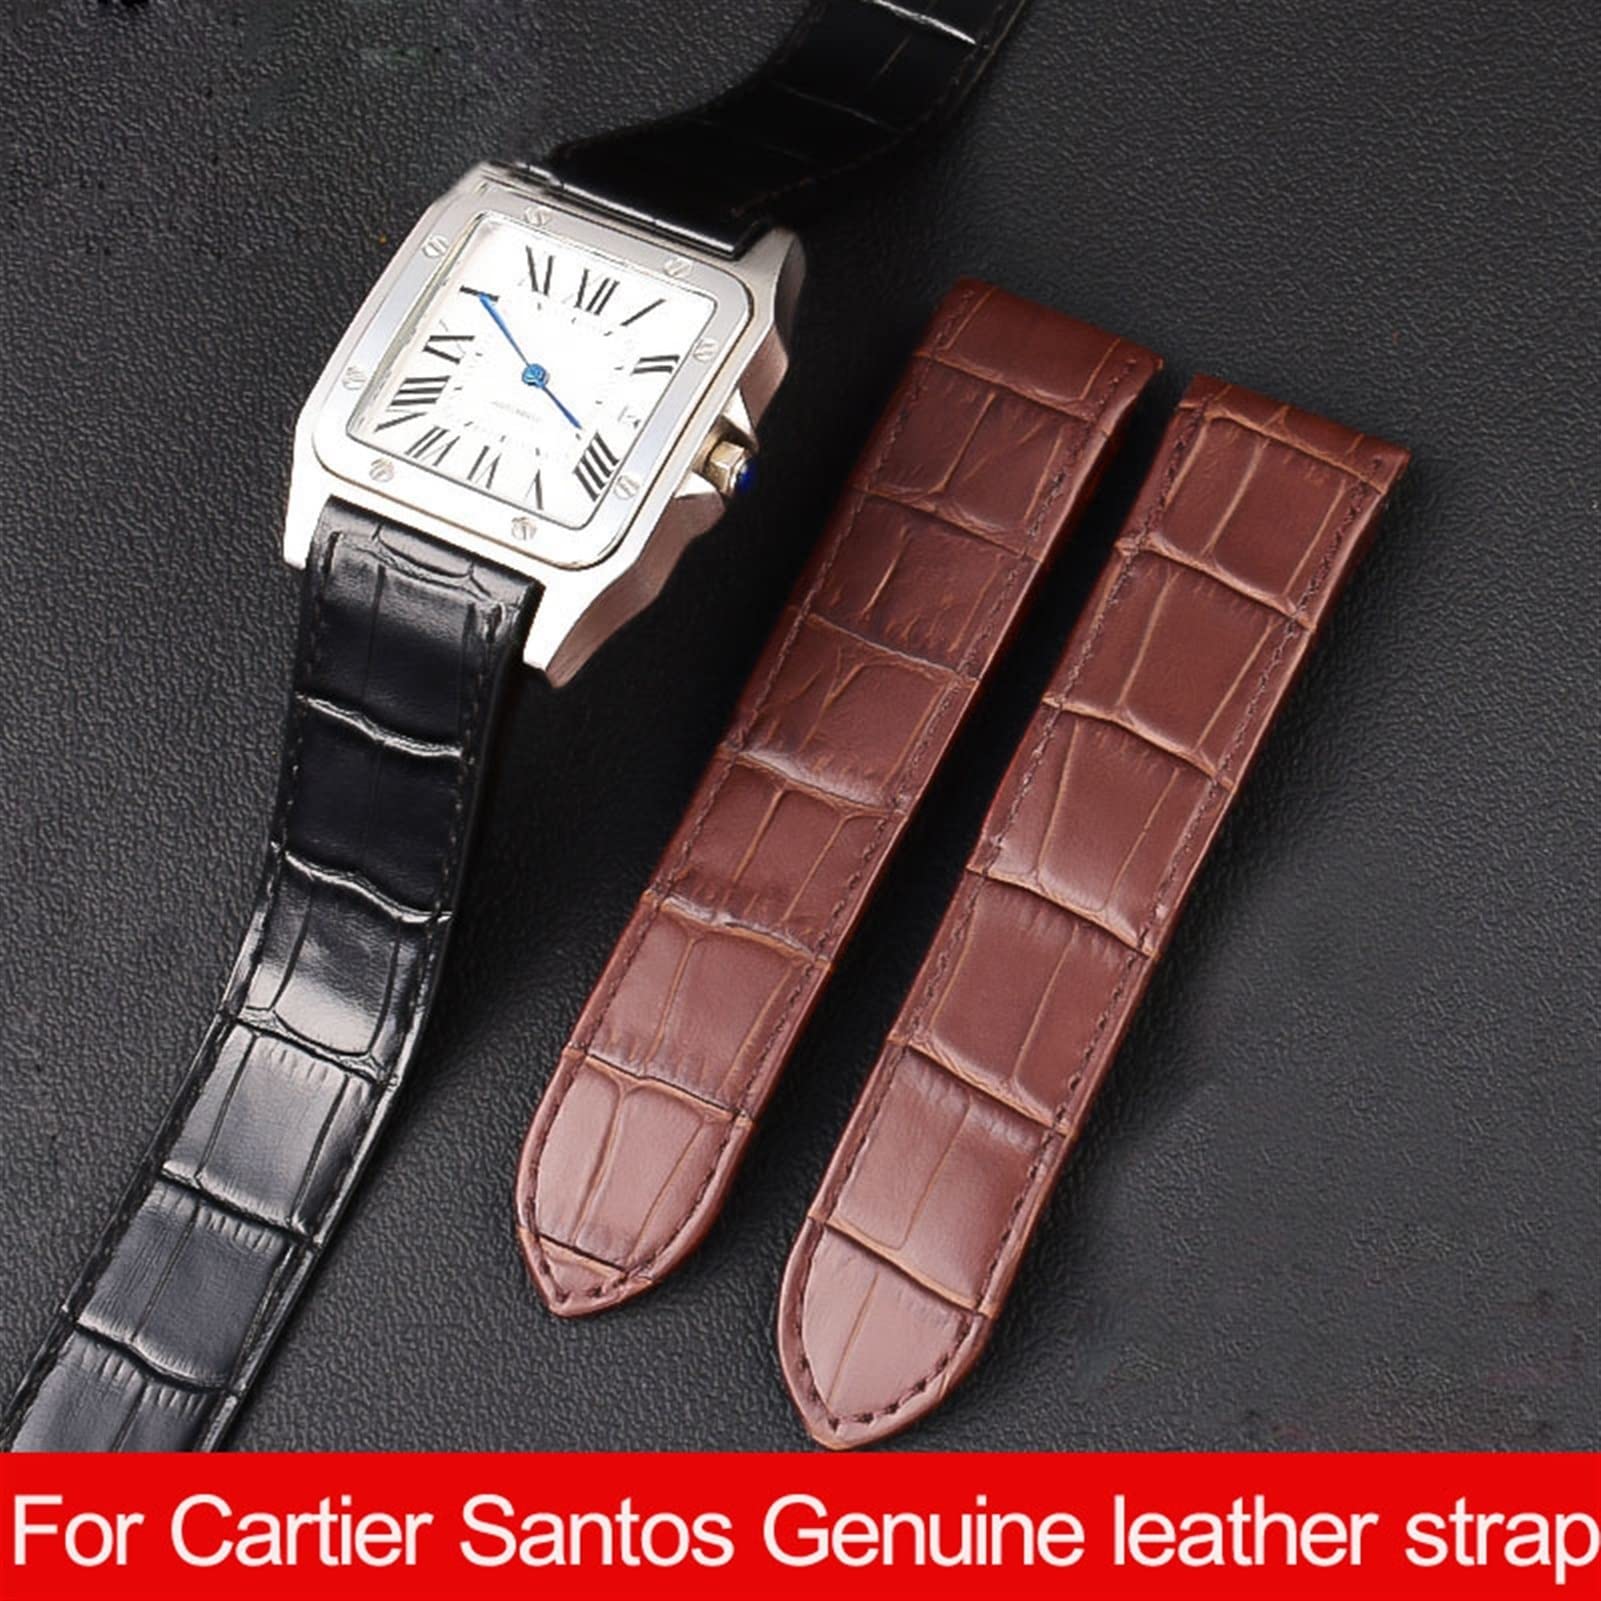 SKM Genuine Leather Watch Strap for Cartier Santos Santos 100 Men and Women Leather Watchband 20mm 23mm (Color : Brown-Silver, Size : 23mm)